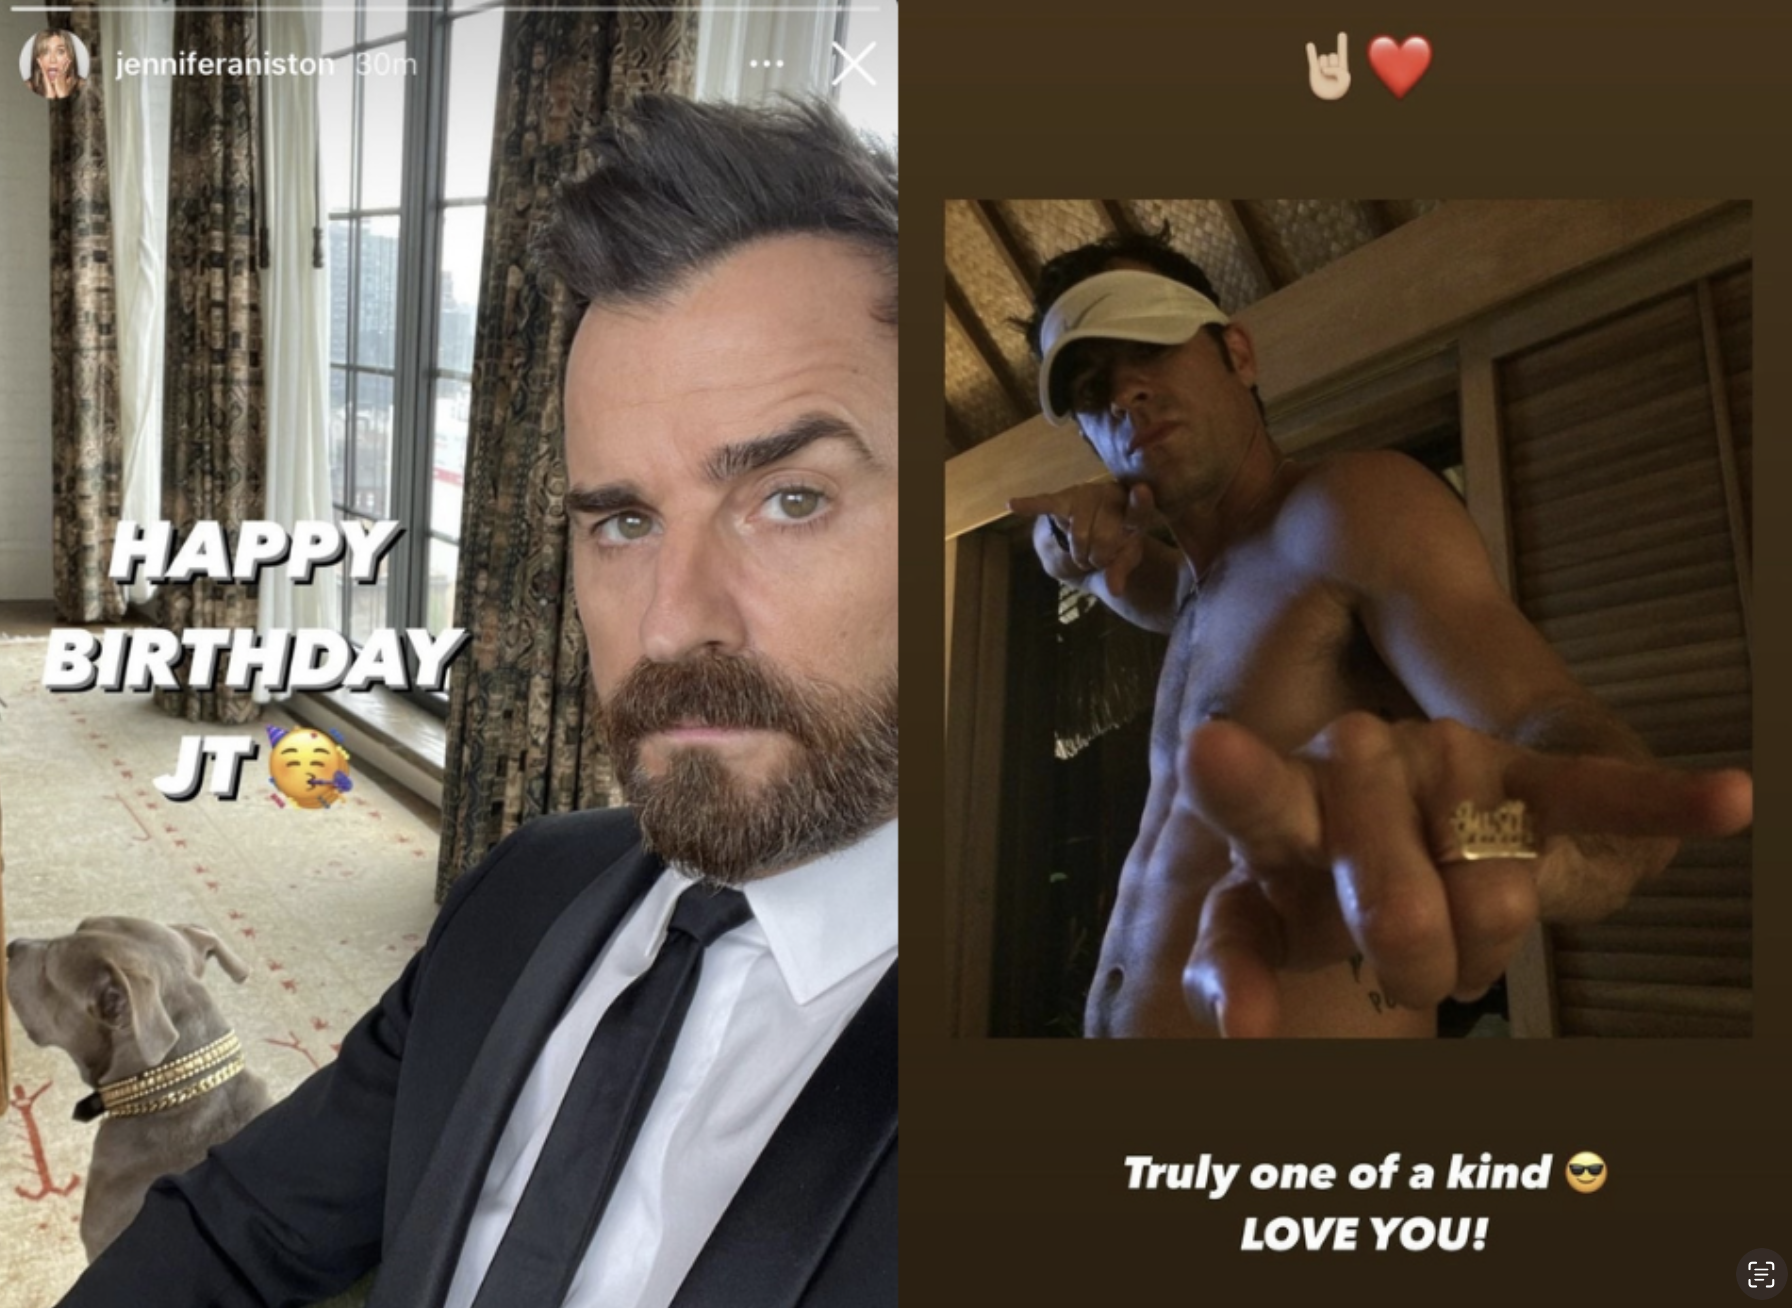 Birthday posts for Justin from Jennifer saying happy birthday JT and truly one of a kind love you